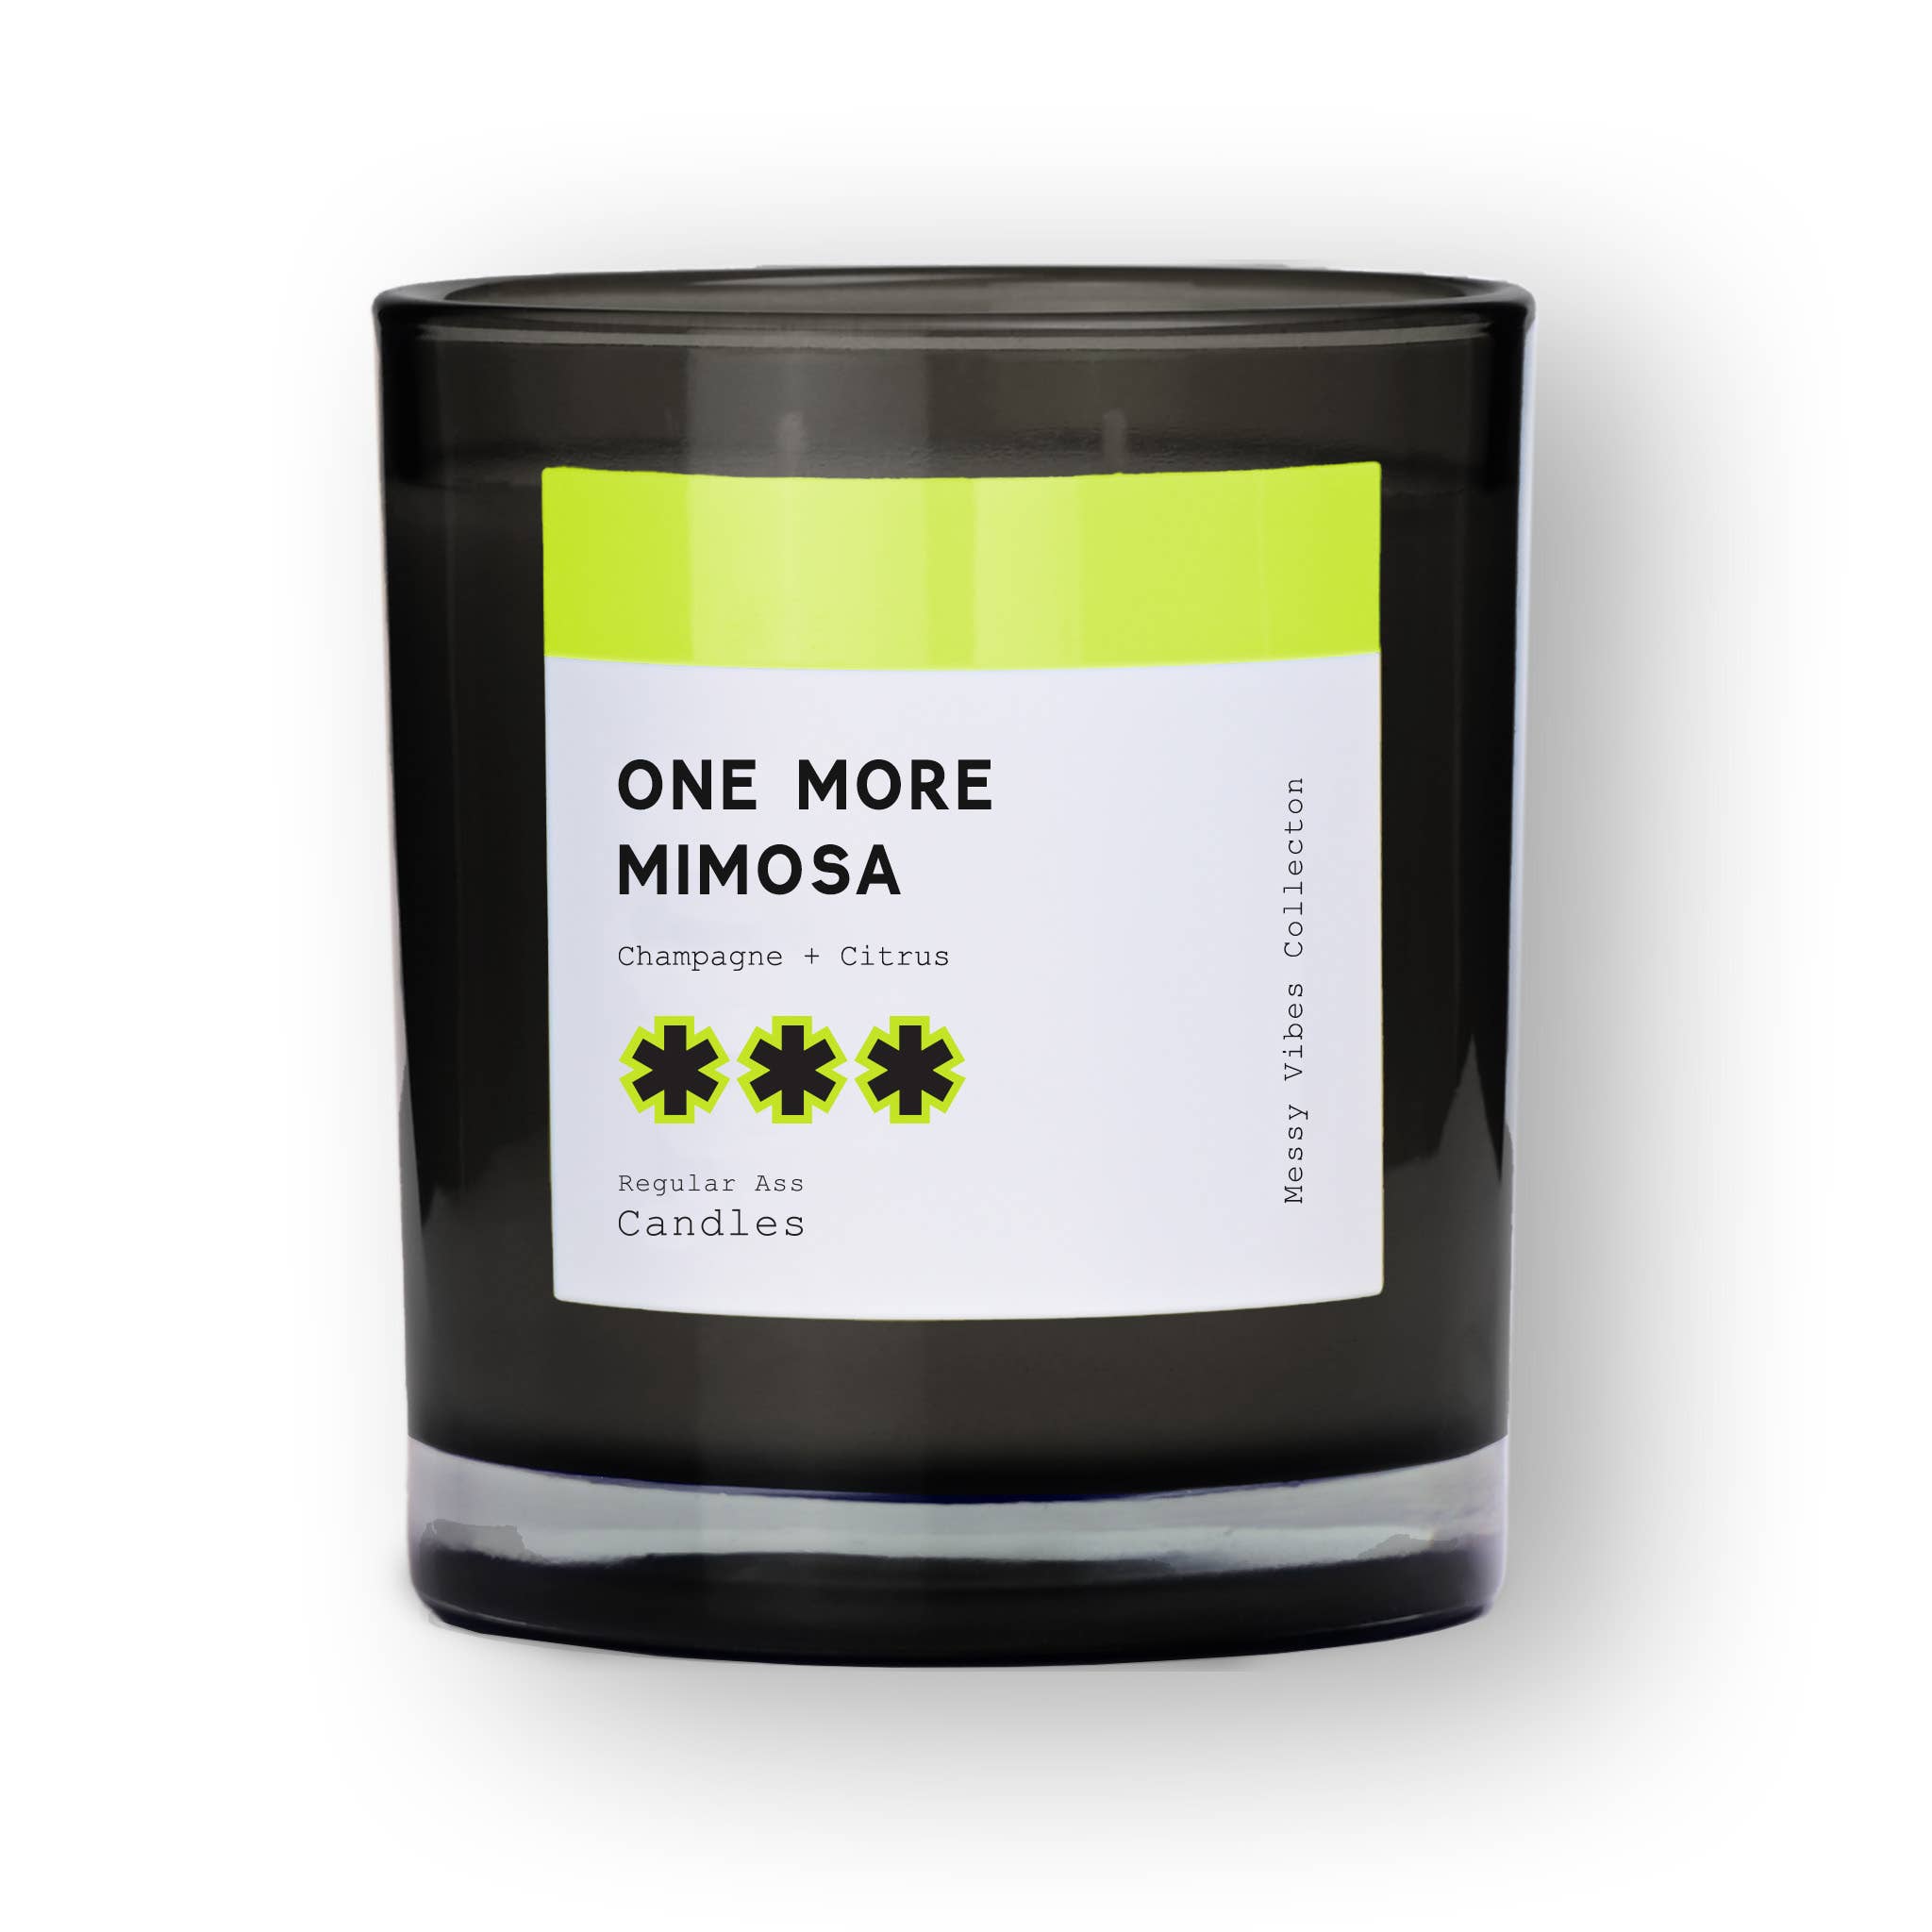 Regular Ass Candles - One More Mimosa 11oz Candle, Champagne + Citrus